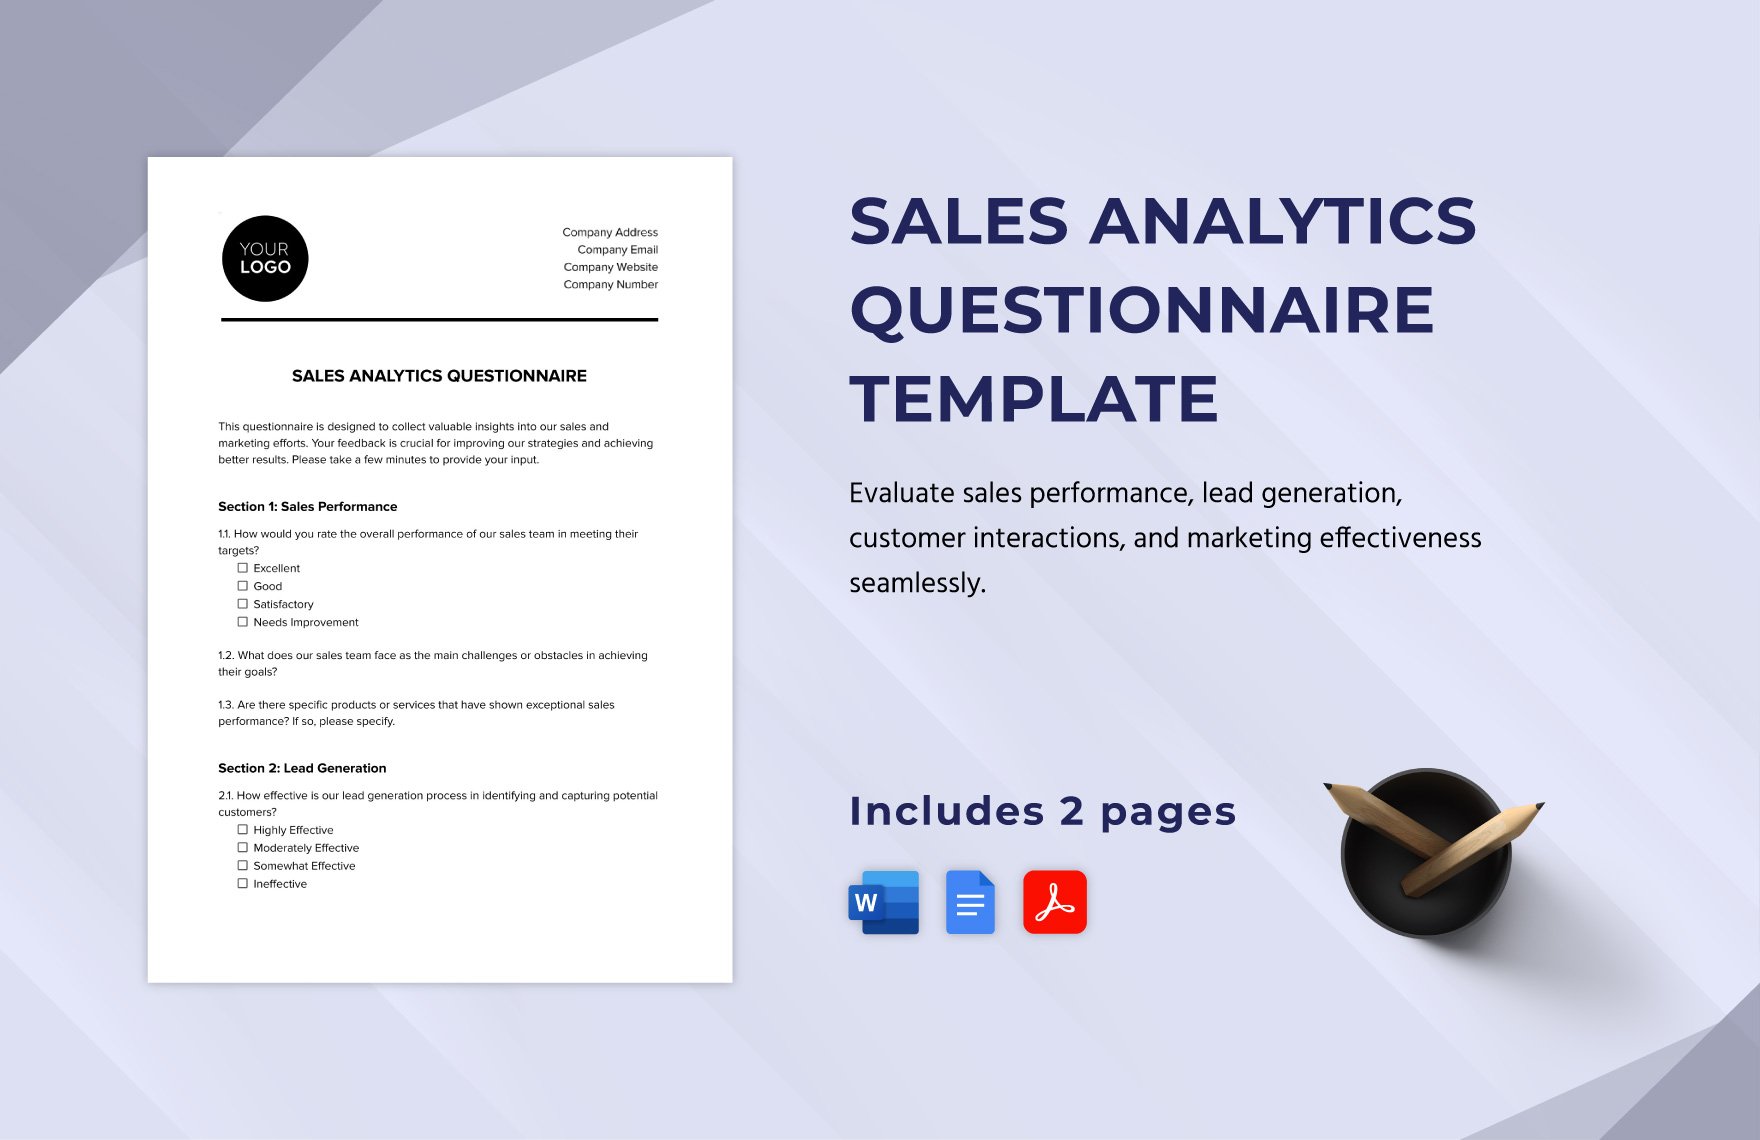 Sales Analytics Questionnaire Template in Word, Google Docs, PDF